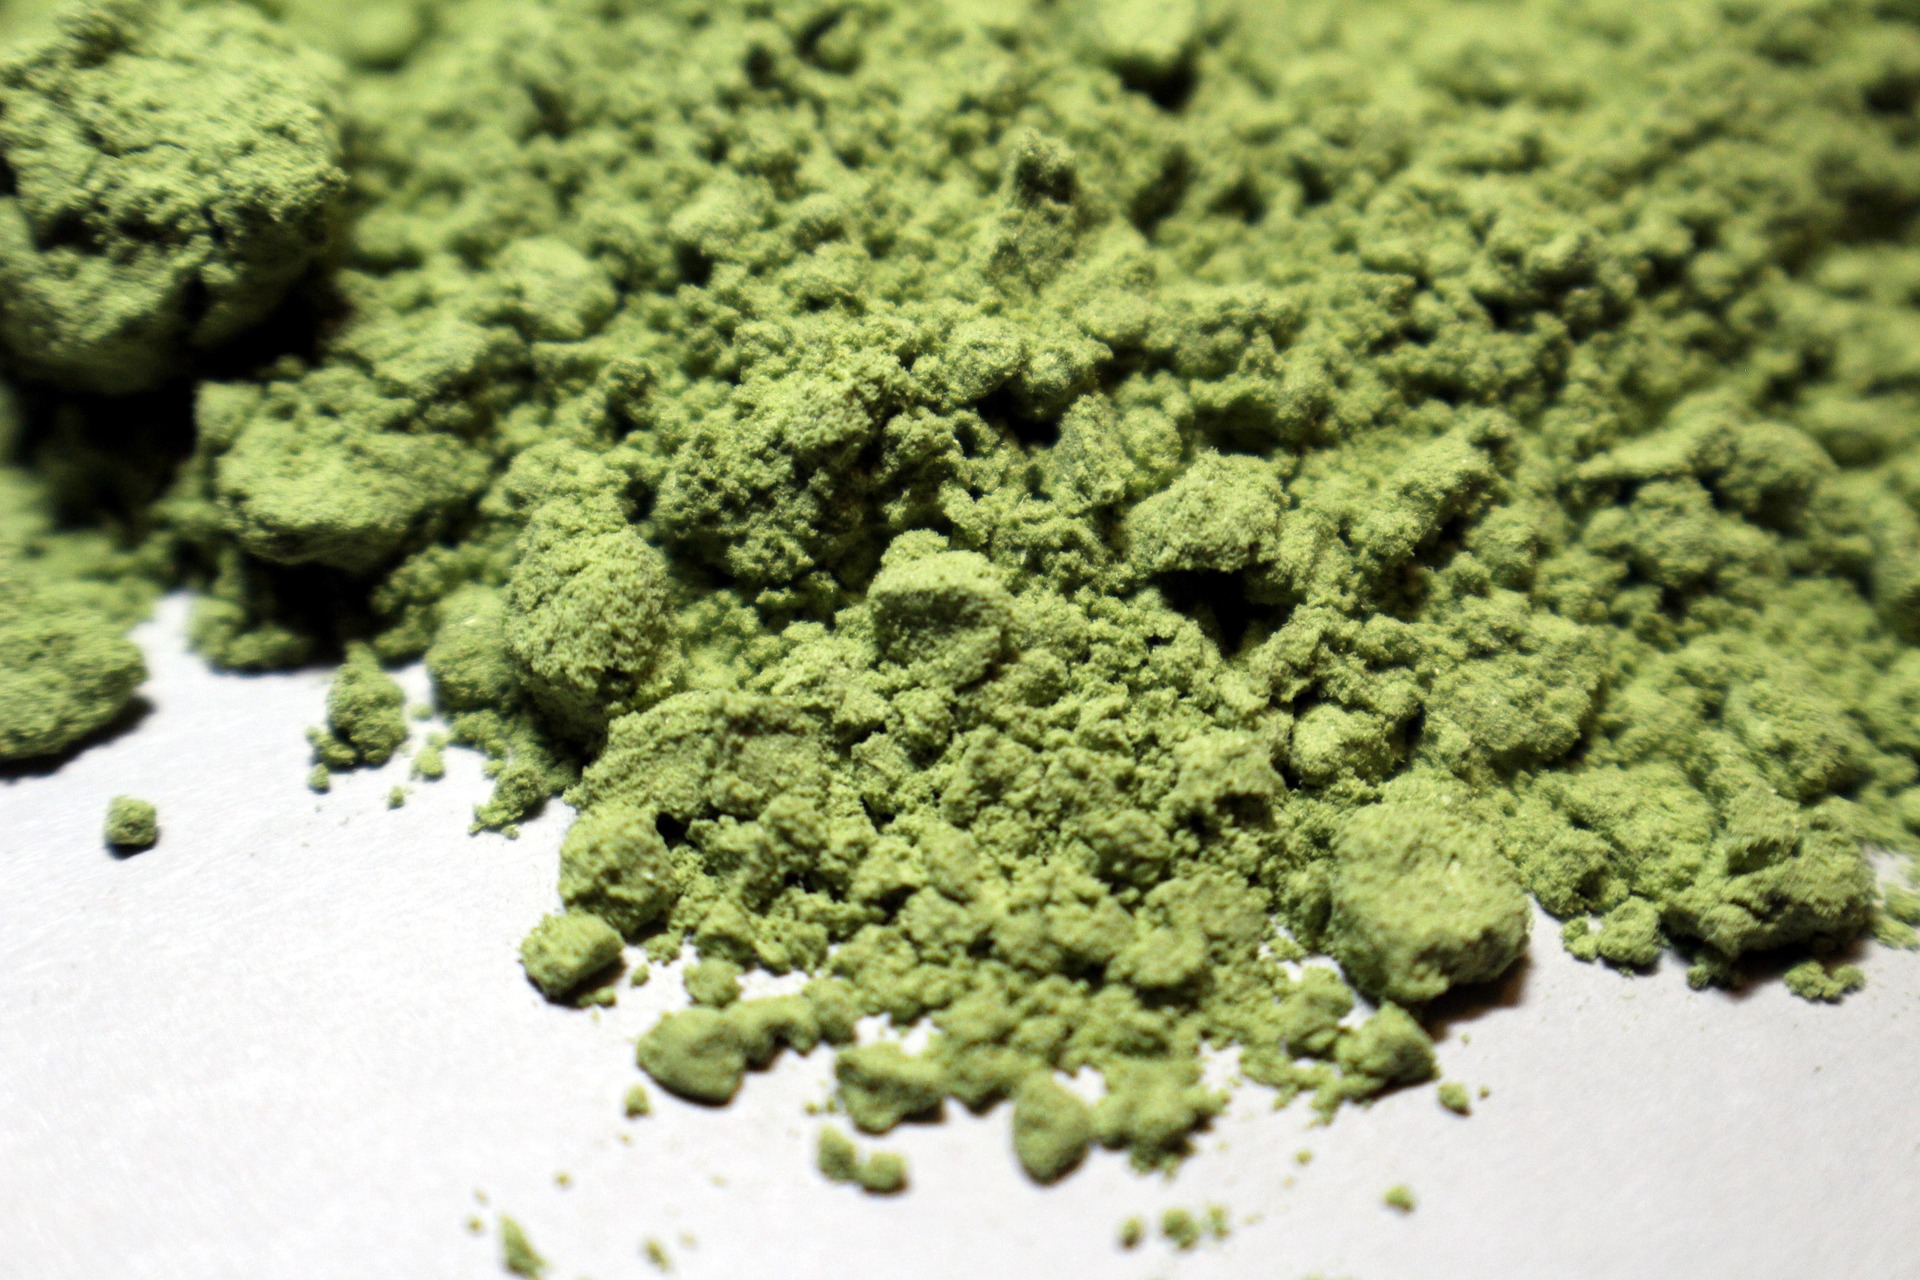 Kratom can be purchased as a capsule or as a powder.